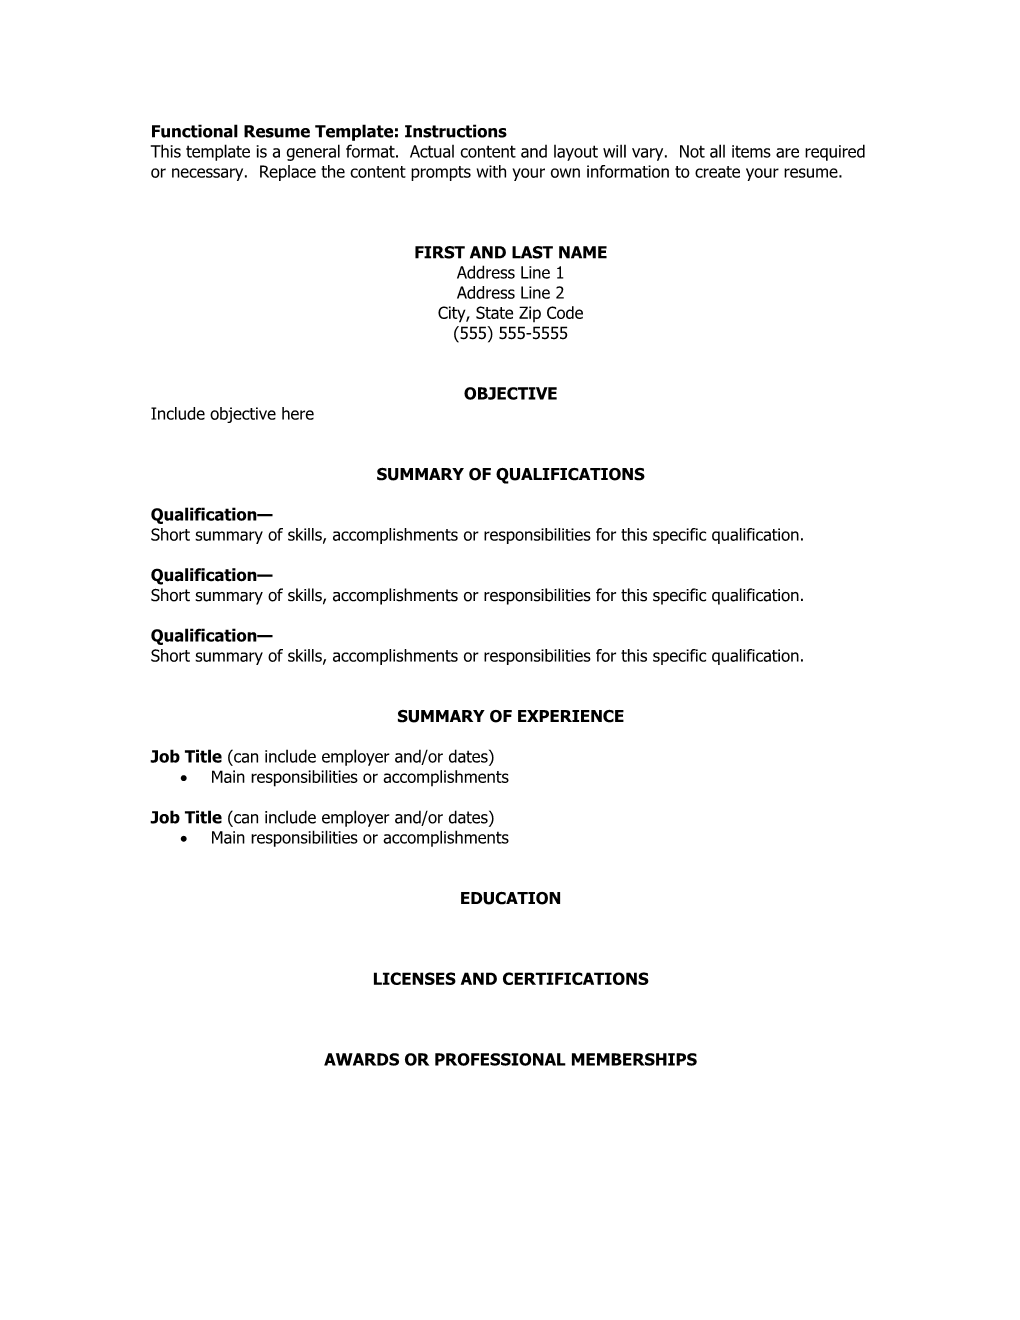 Functional Resume Template: Instructions